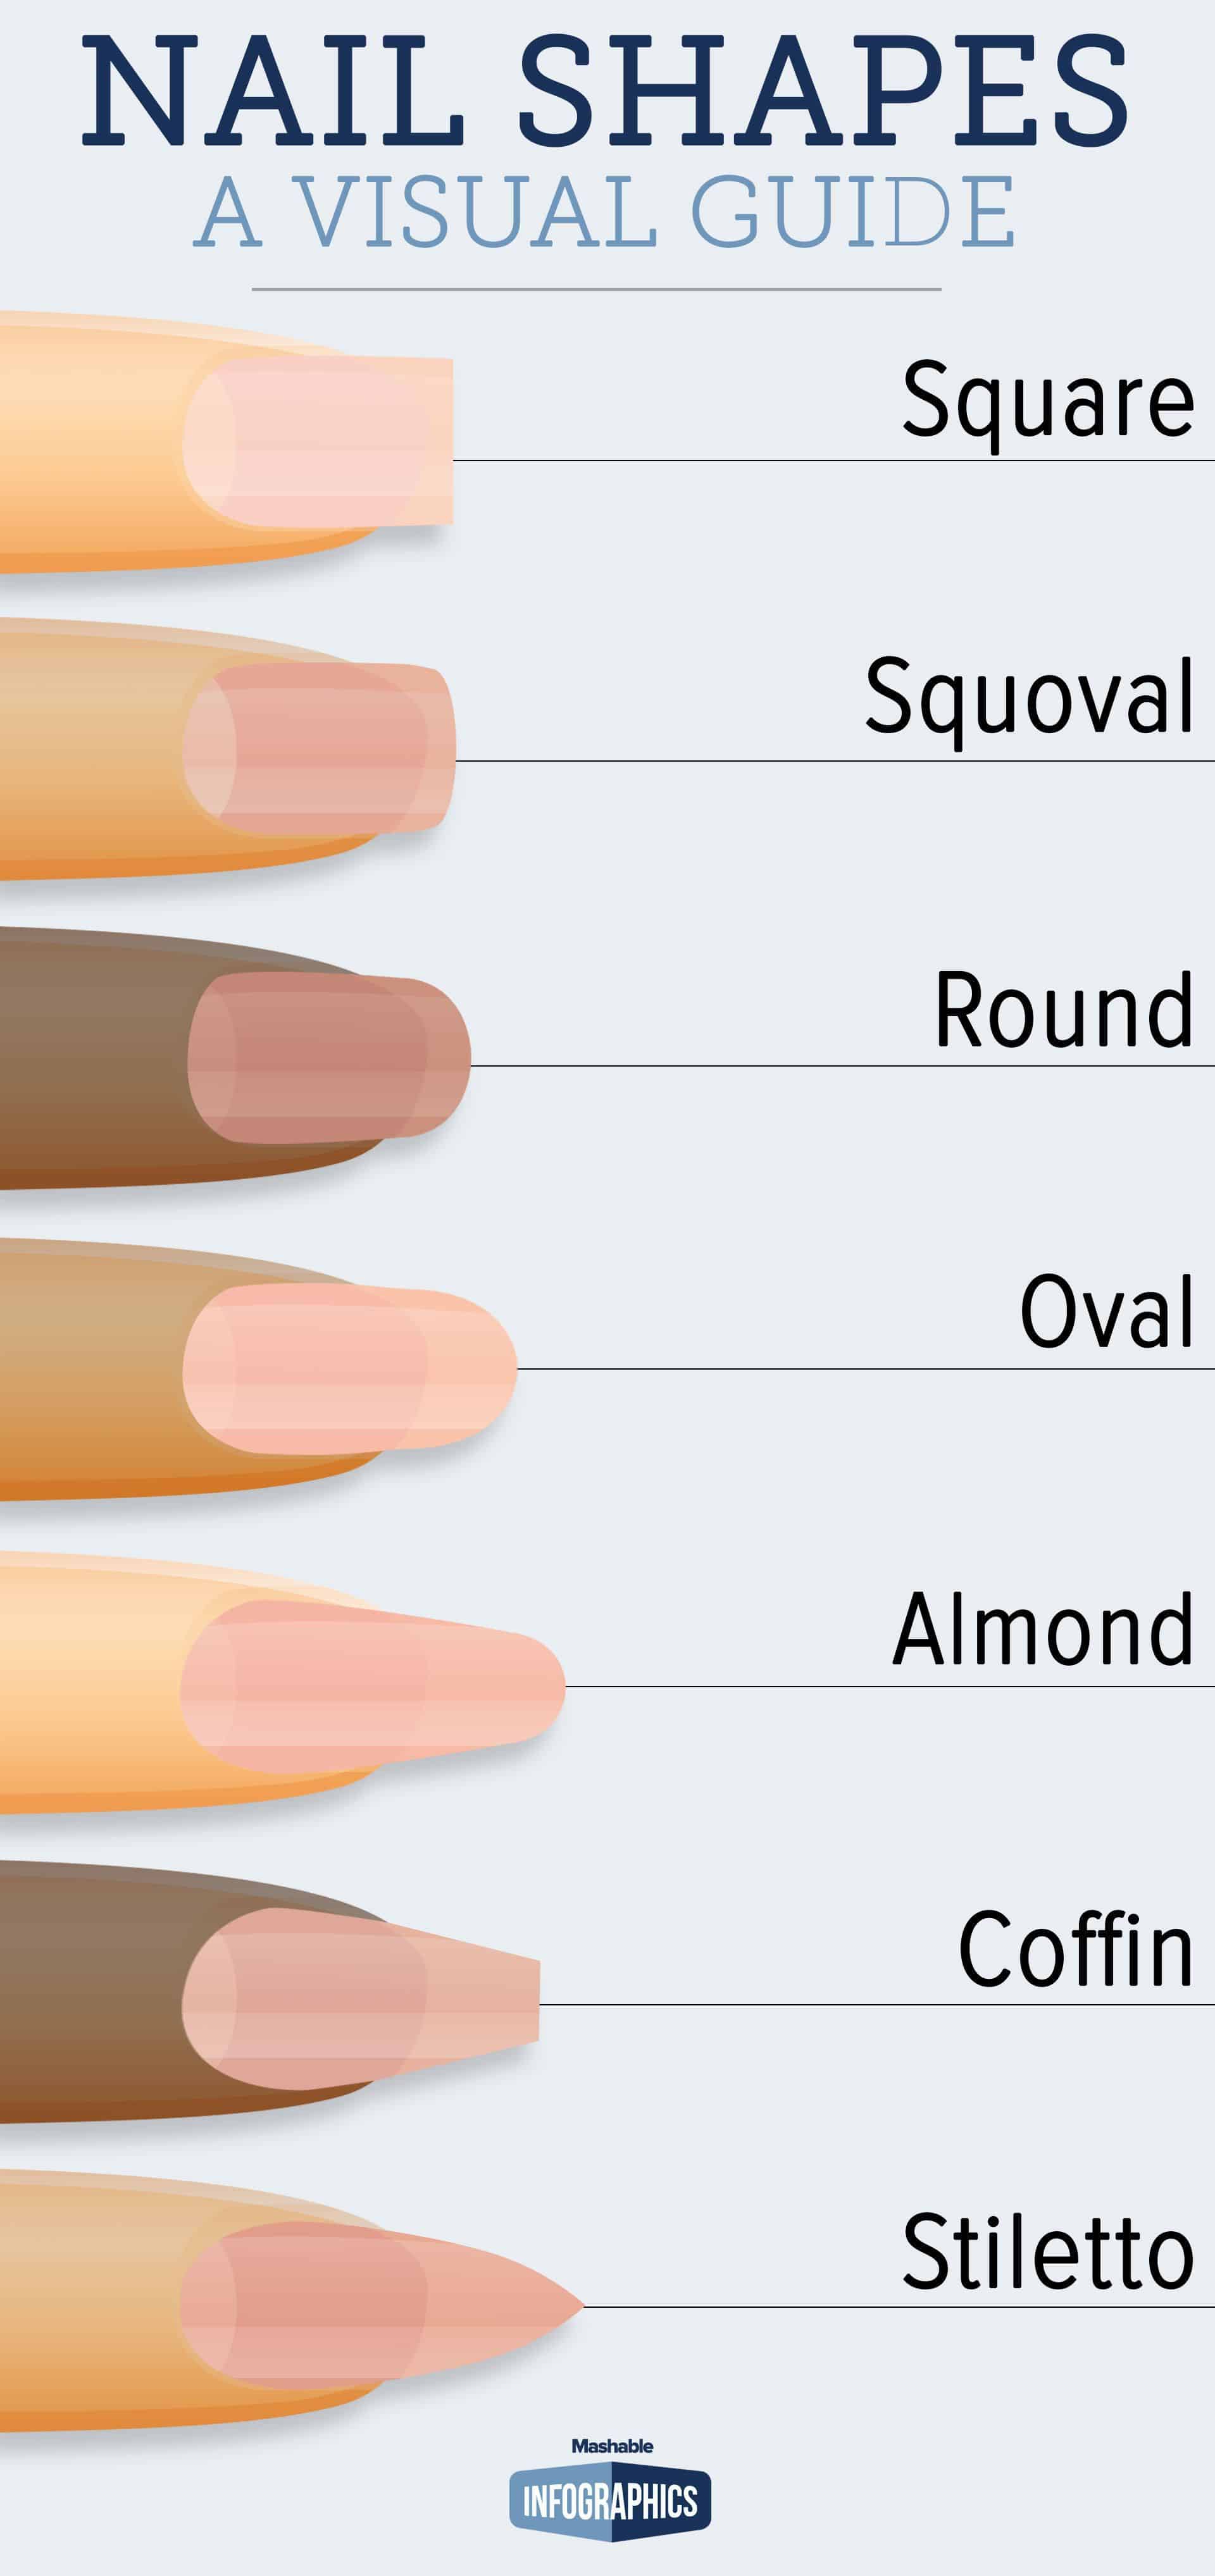 Before Your Next Manicure, Look At This Guide To Fingernail Shapes | Daily  Infographic